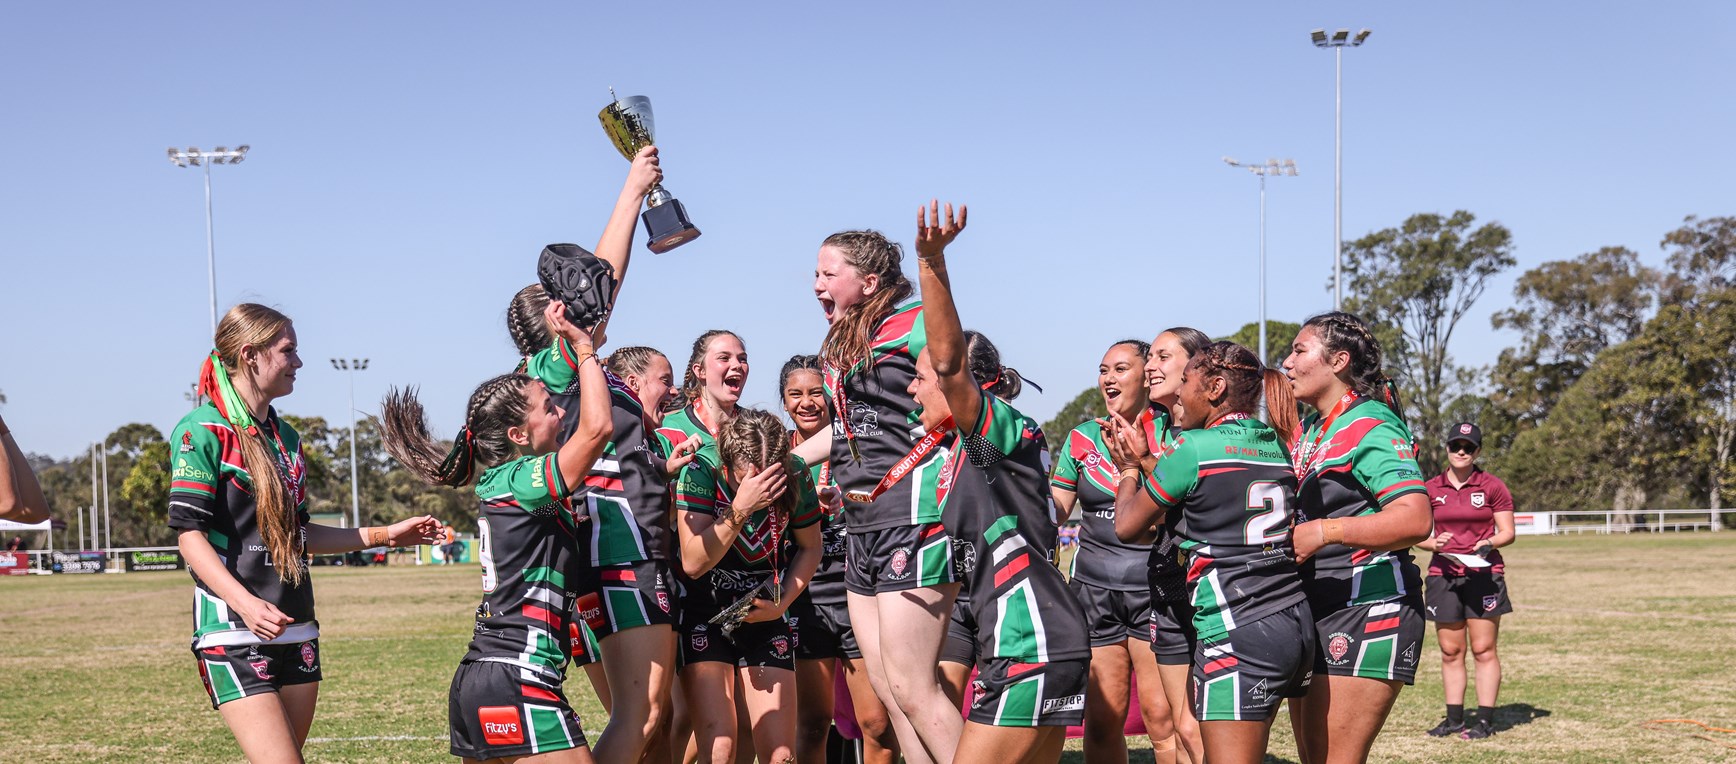 In pictures: South East junior girls grand finals